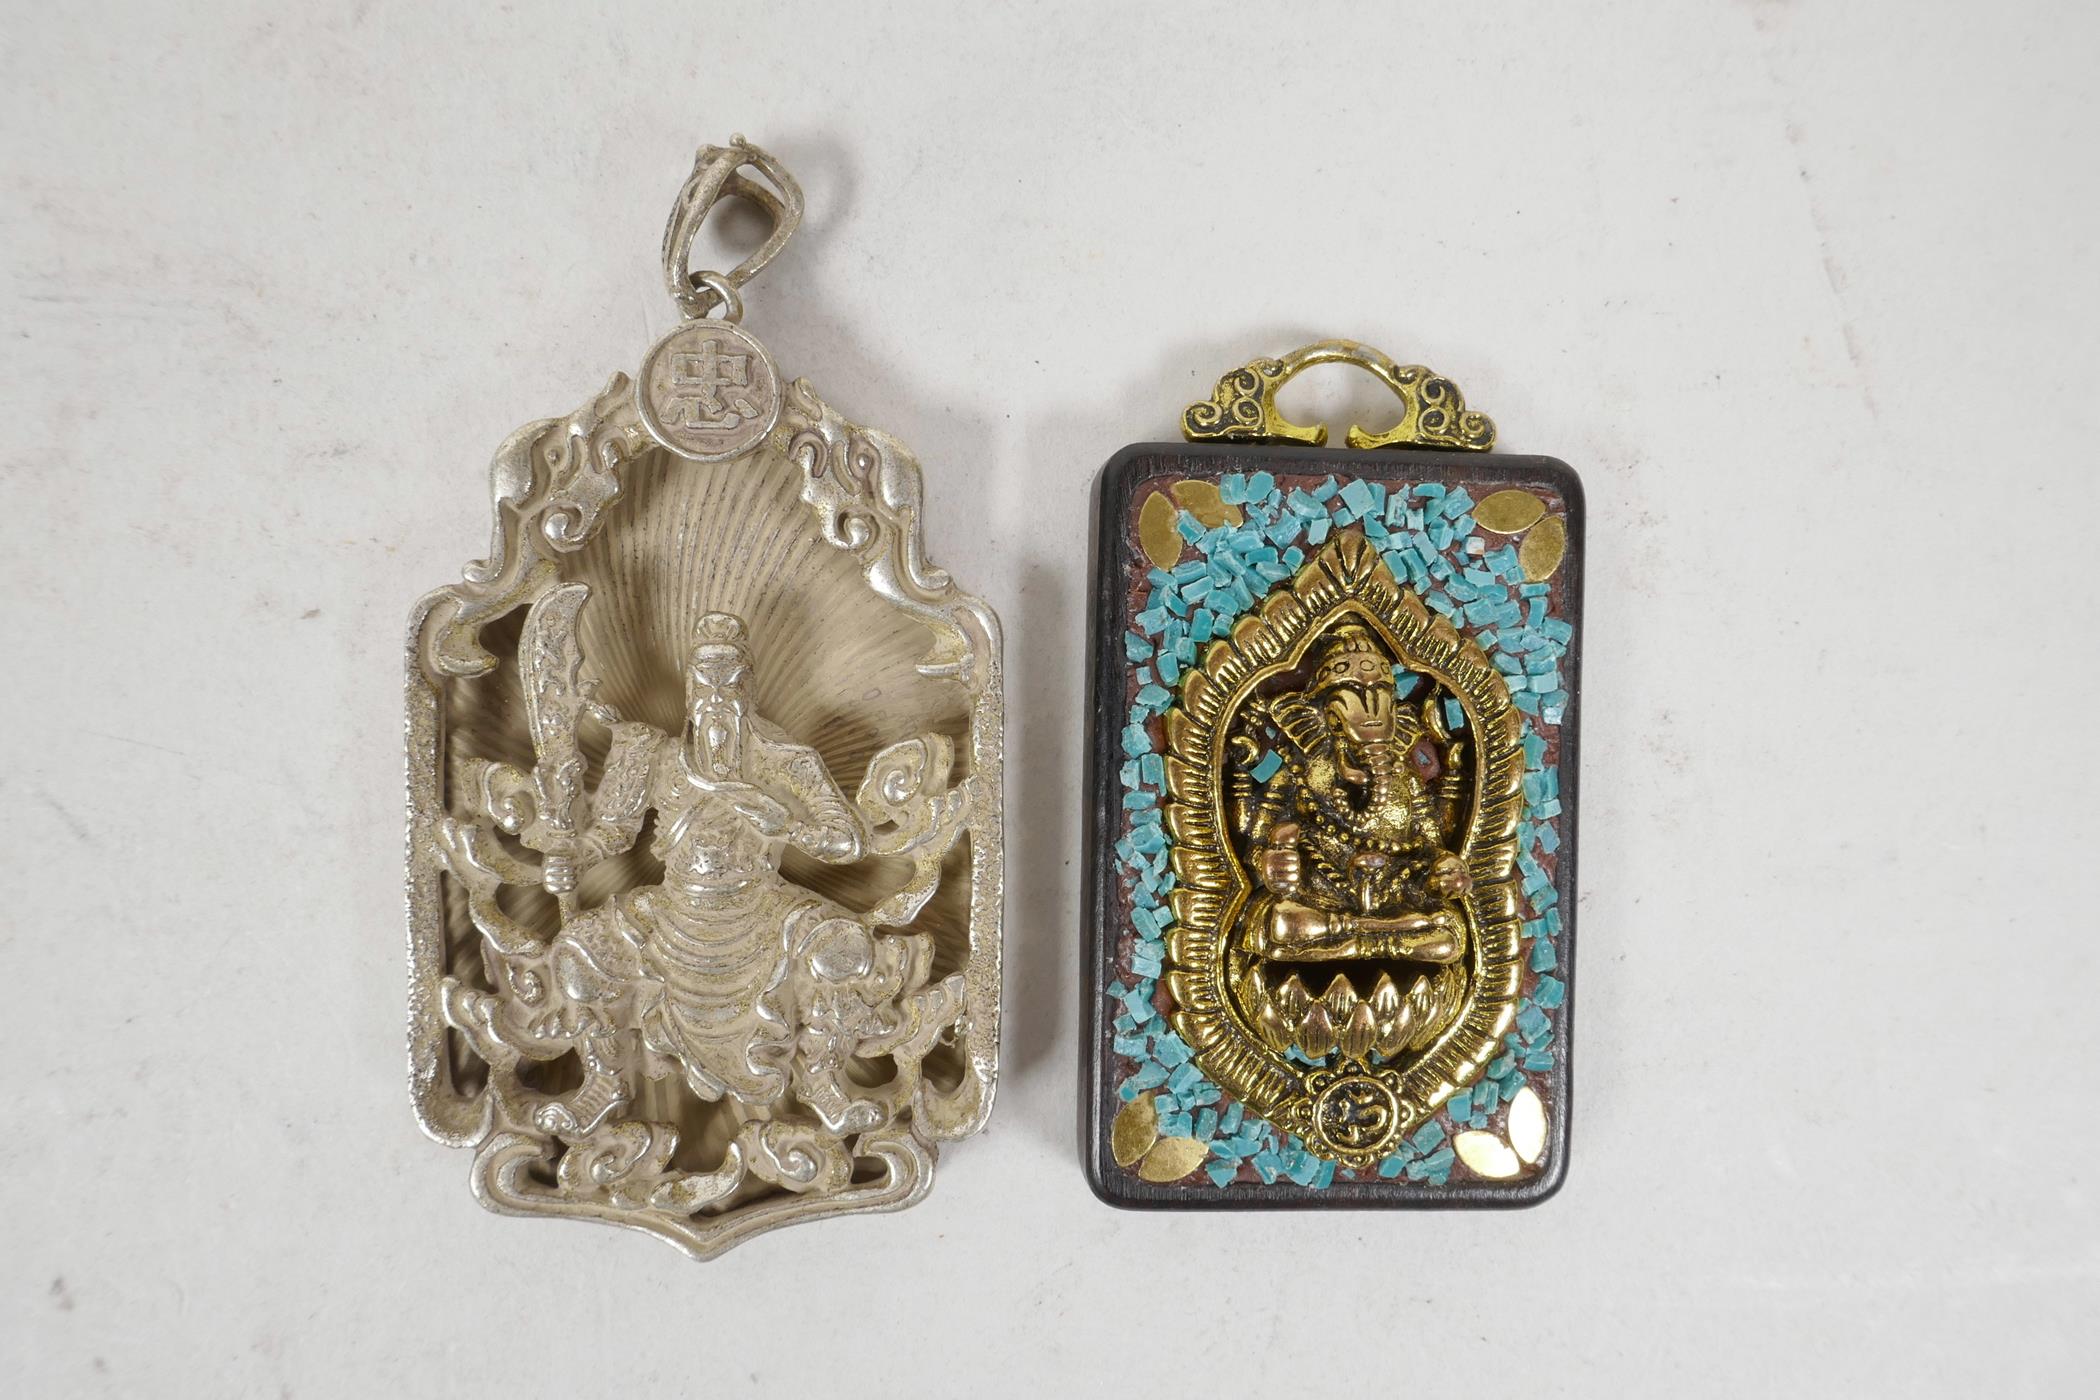 A Chinese white metal pendant decorated with a warrior, together with an Indian pendant decorated